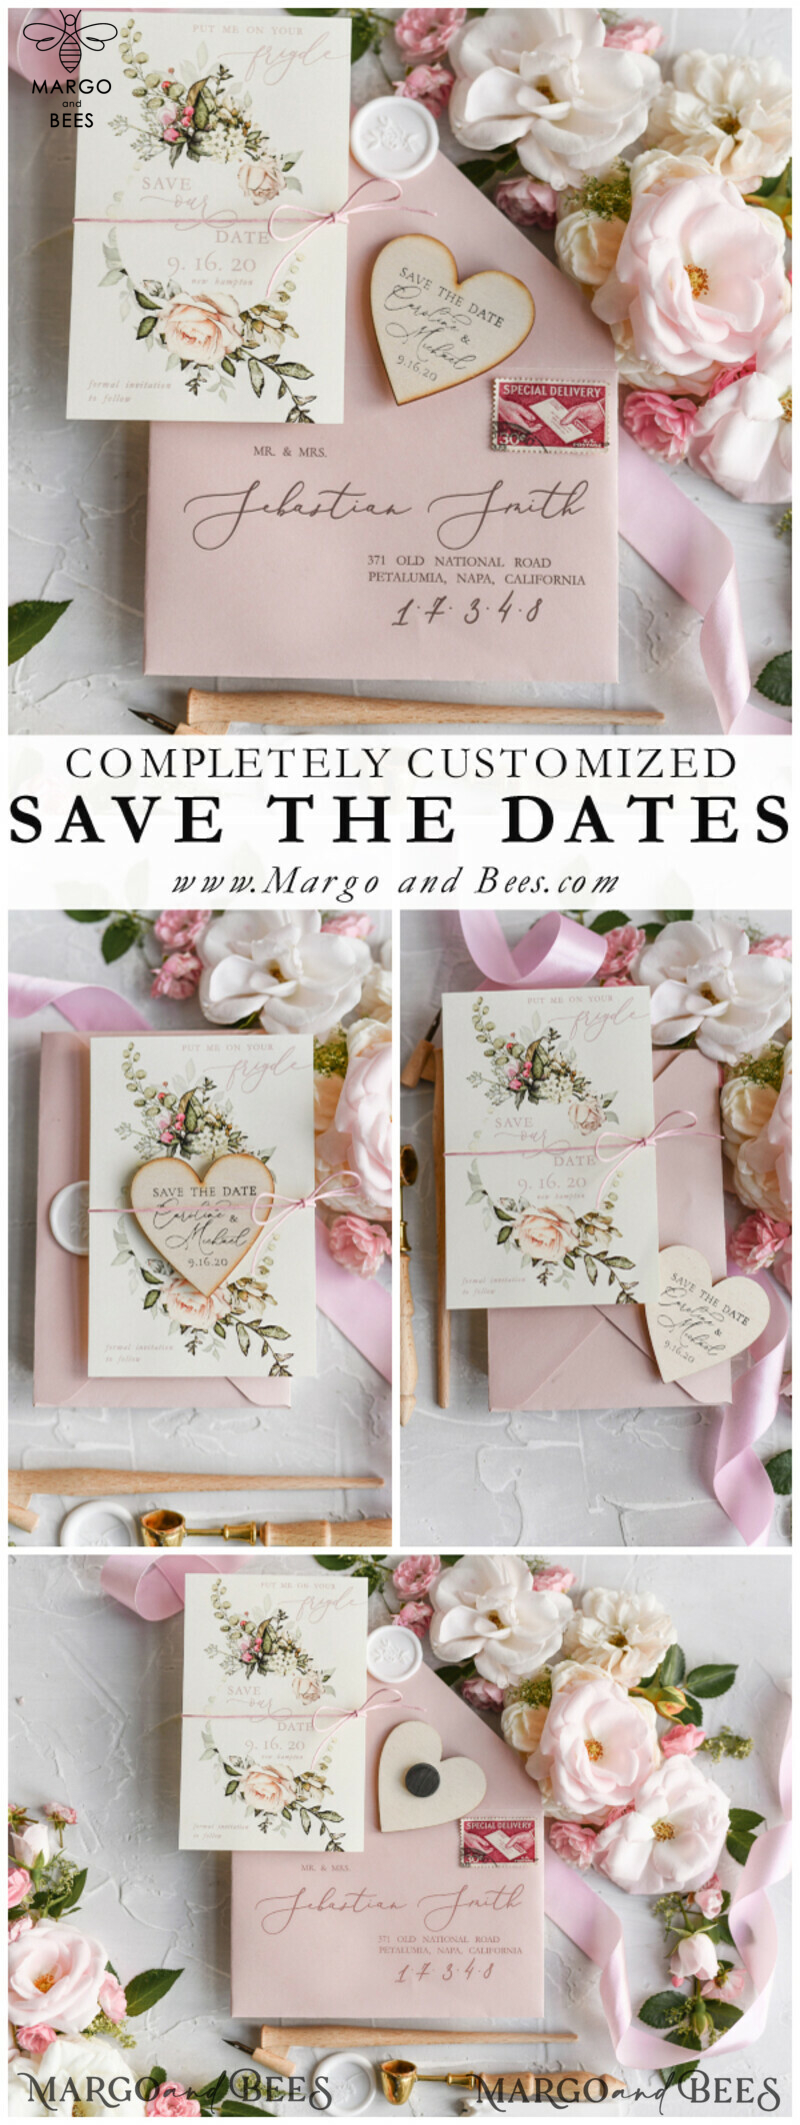 Handmade Save the Date Magnets Cards: Wedding Save The Date Card and Heart Magnet with Blush Pink Save Our Date Wood Magnets-2